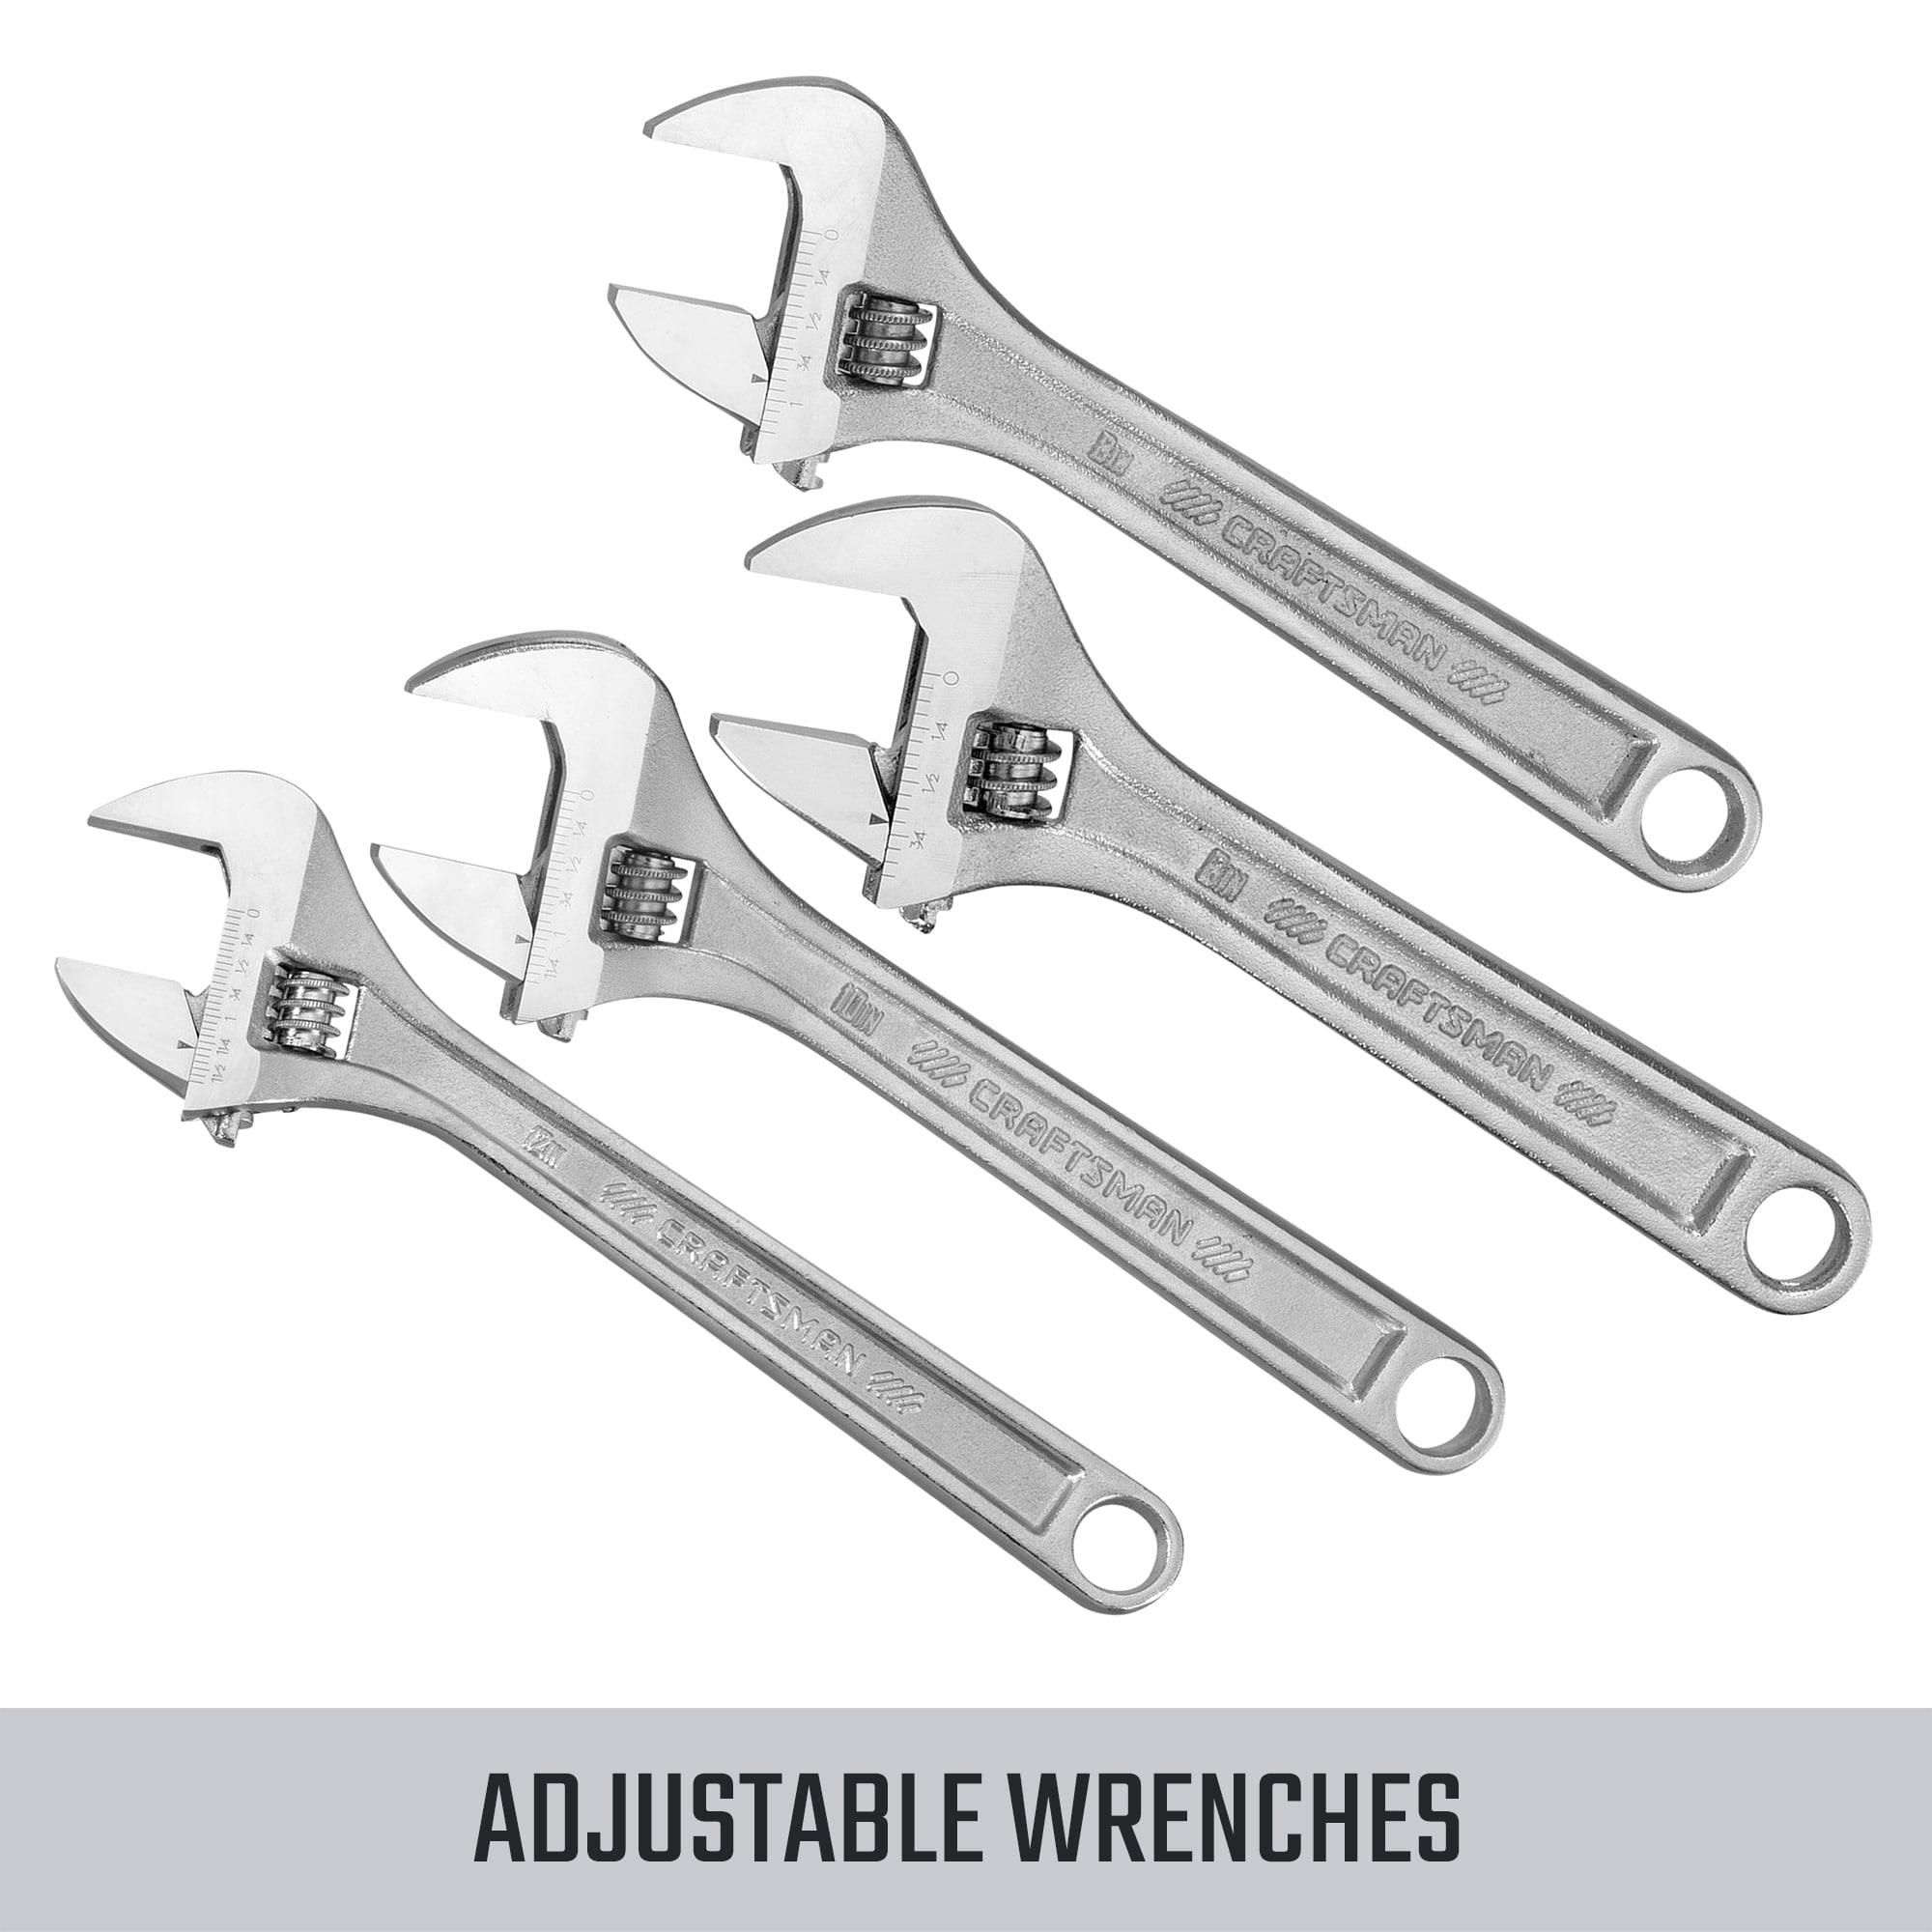 CRAFTSMAN 10-in Steel Reversible Jaw Adjustable Wrench